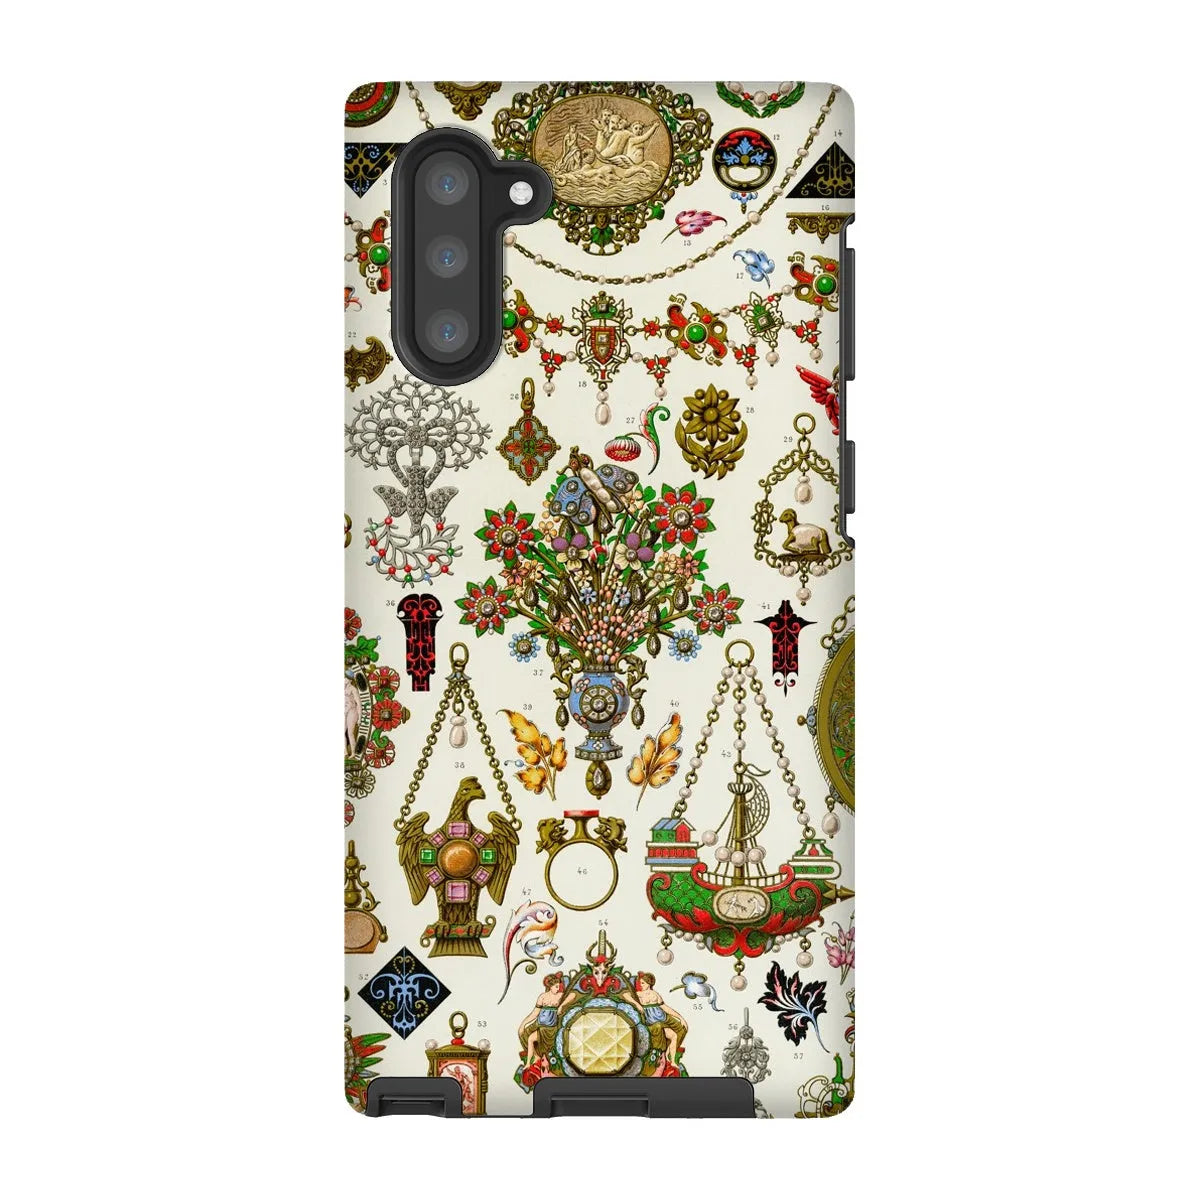 French Jewelry By Auguste Racinet Tough Phone Case - Samsung Galaxy Note 10 / Matte - Mobile Phone Cases - Aesthetic Art